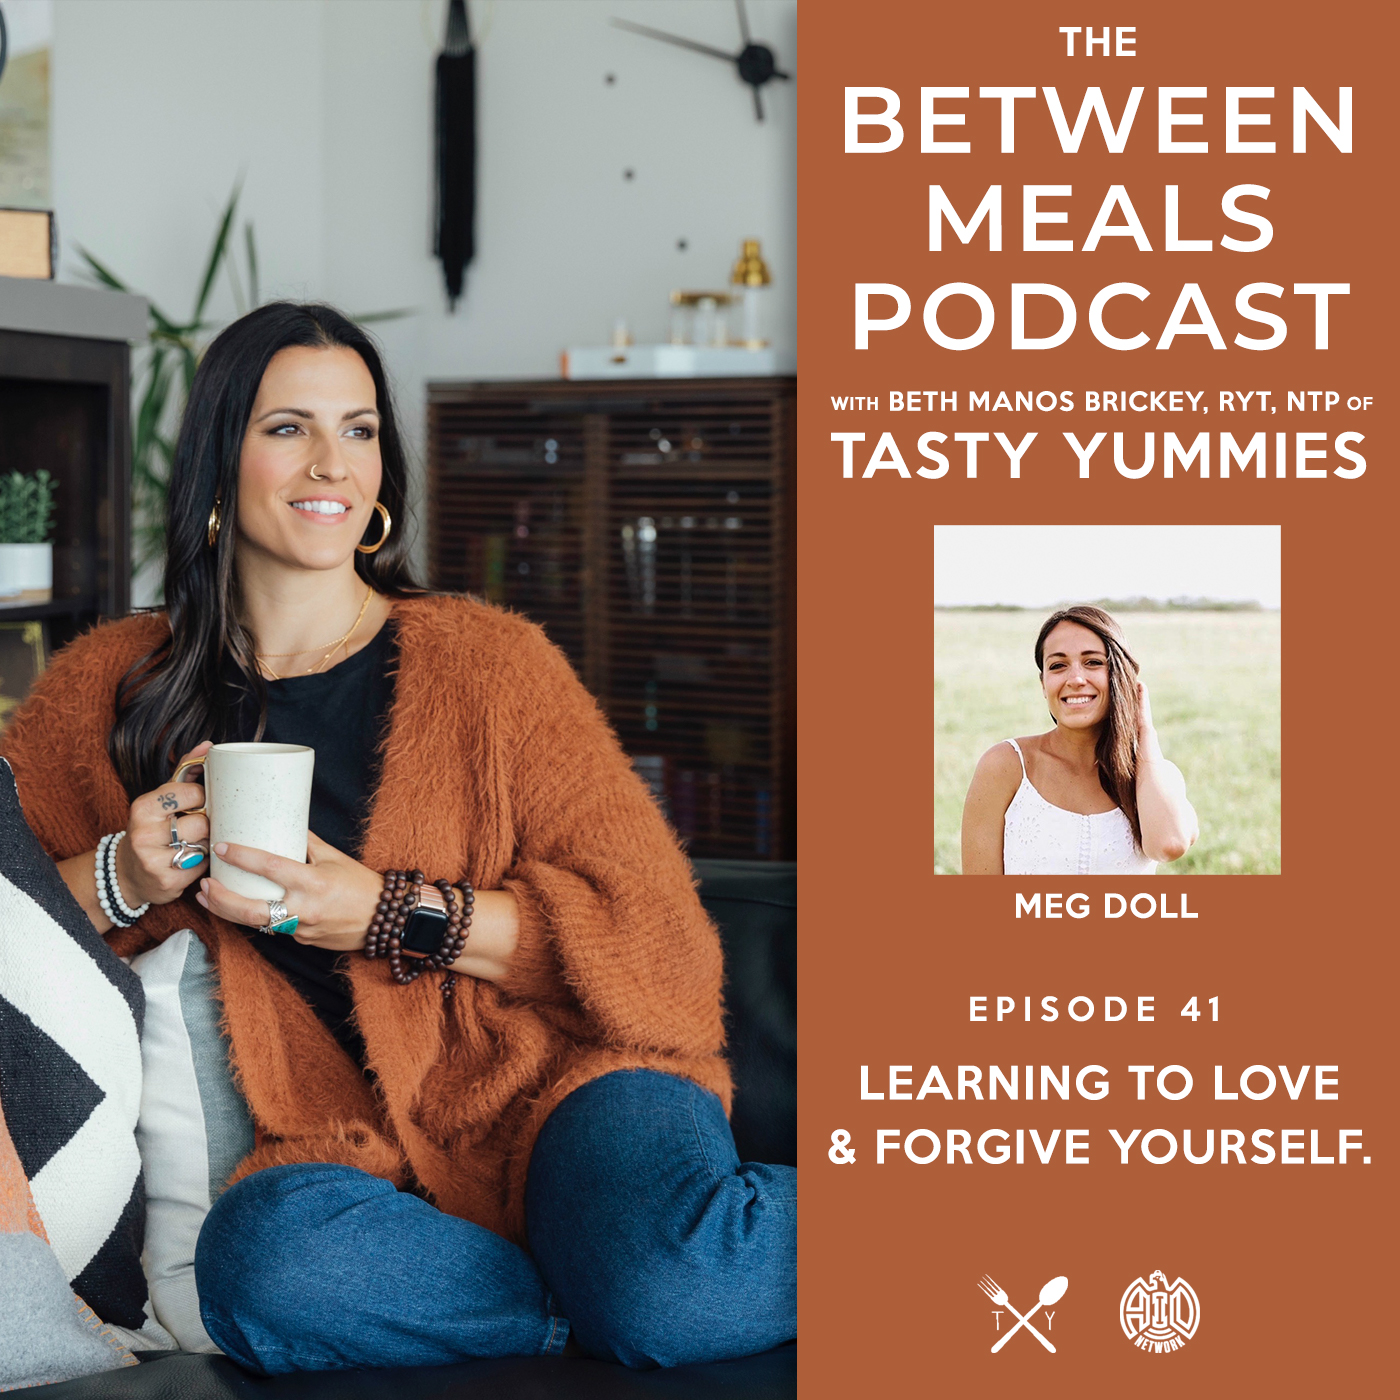 Between Meals Podcast. Episode 41: Learning to Love and Forgive Yourself